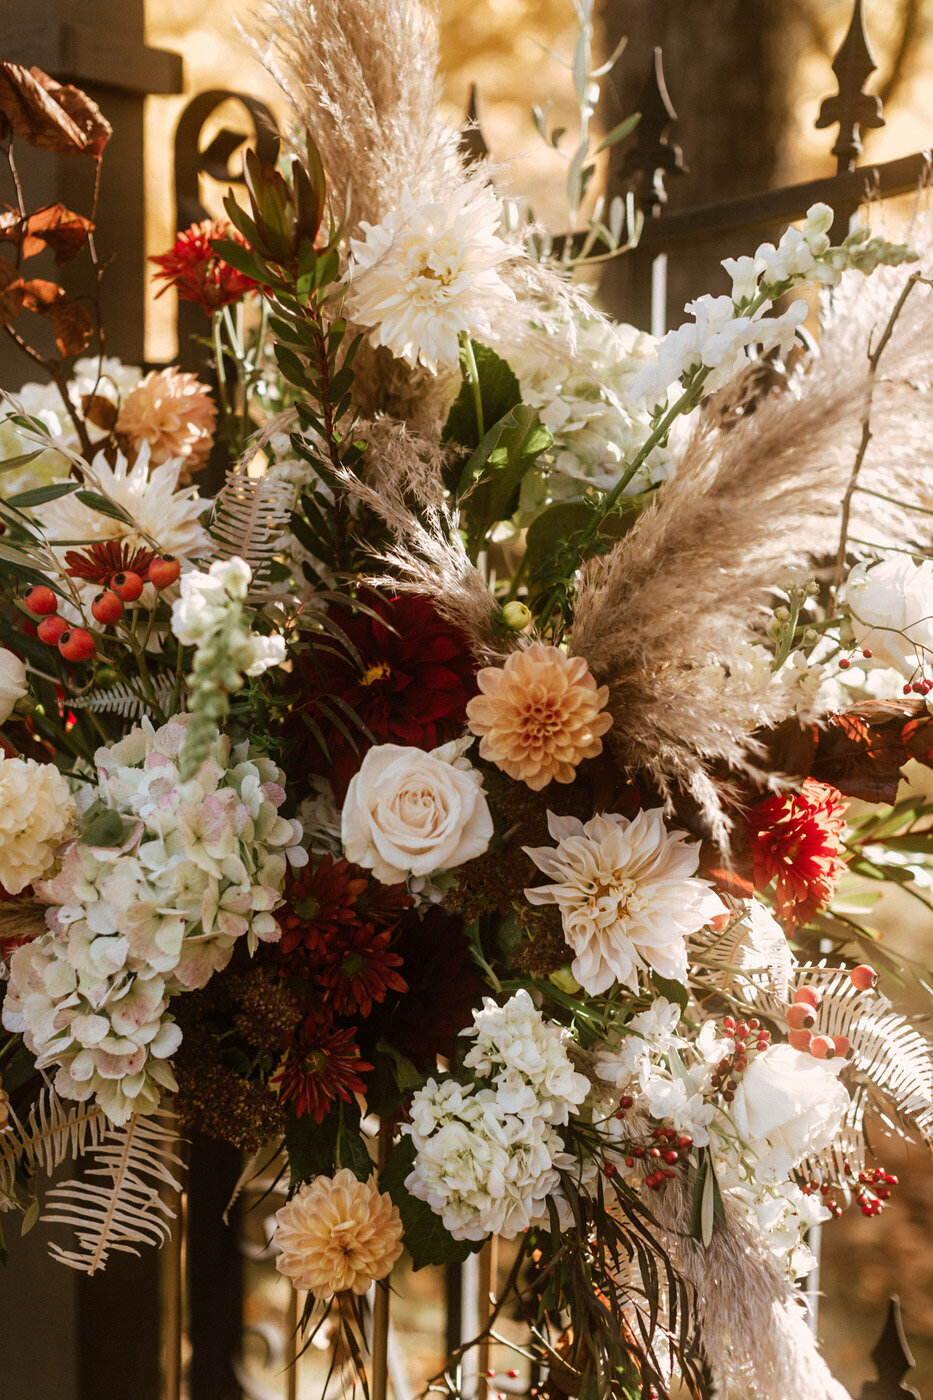 Florist for Weddings and Events - Central Indiana 32